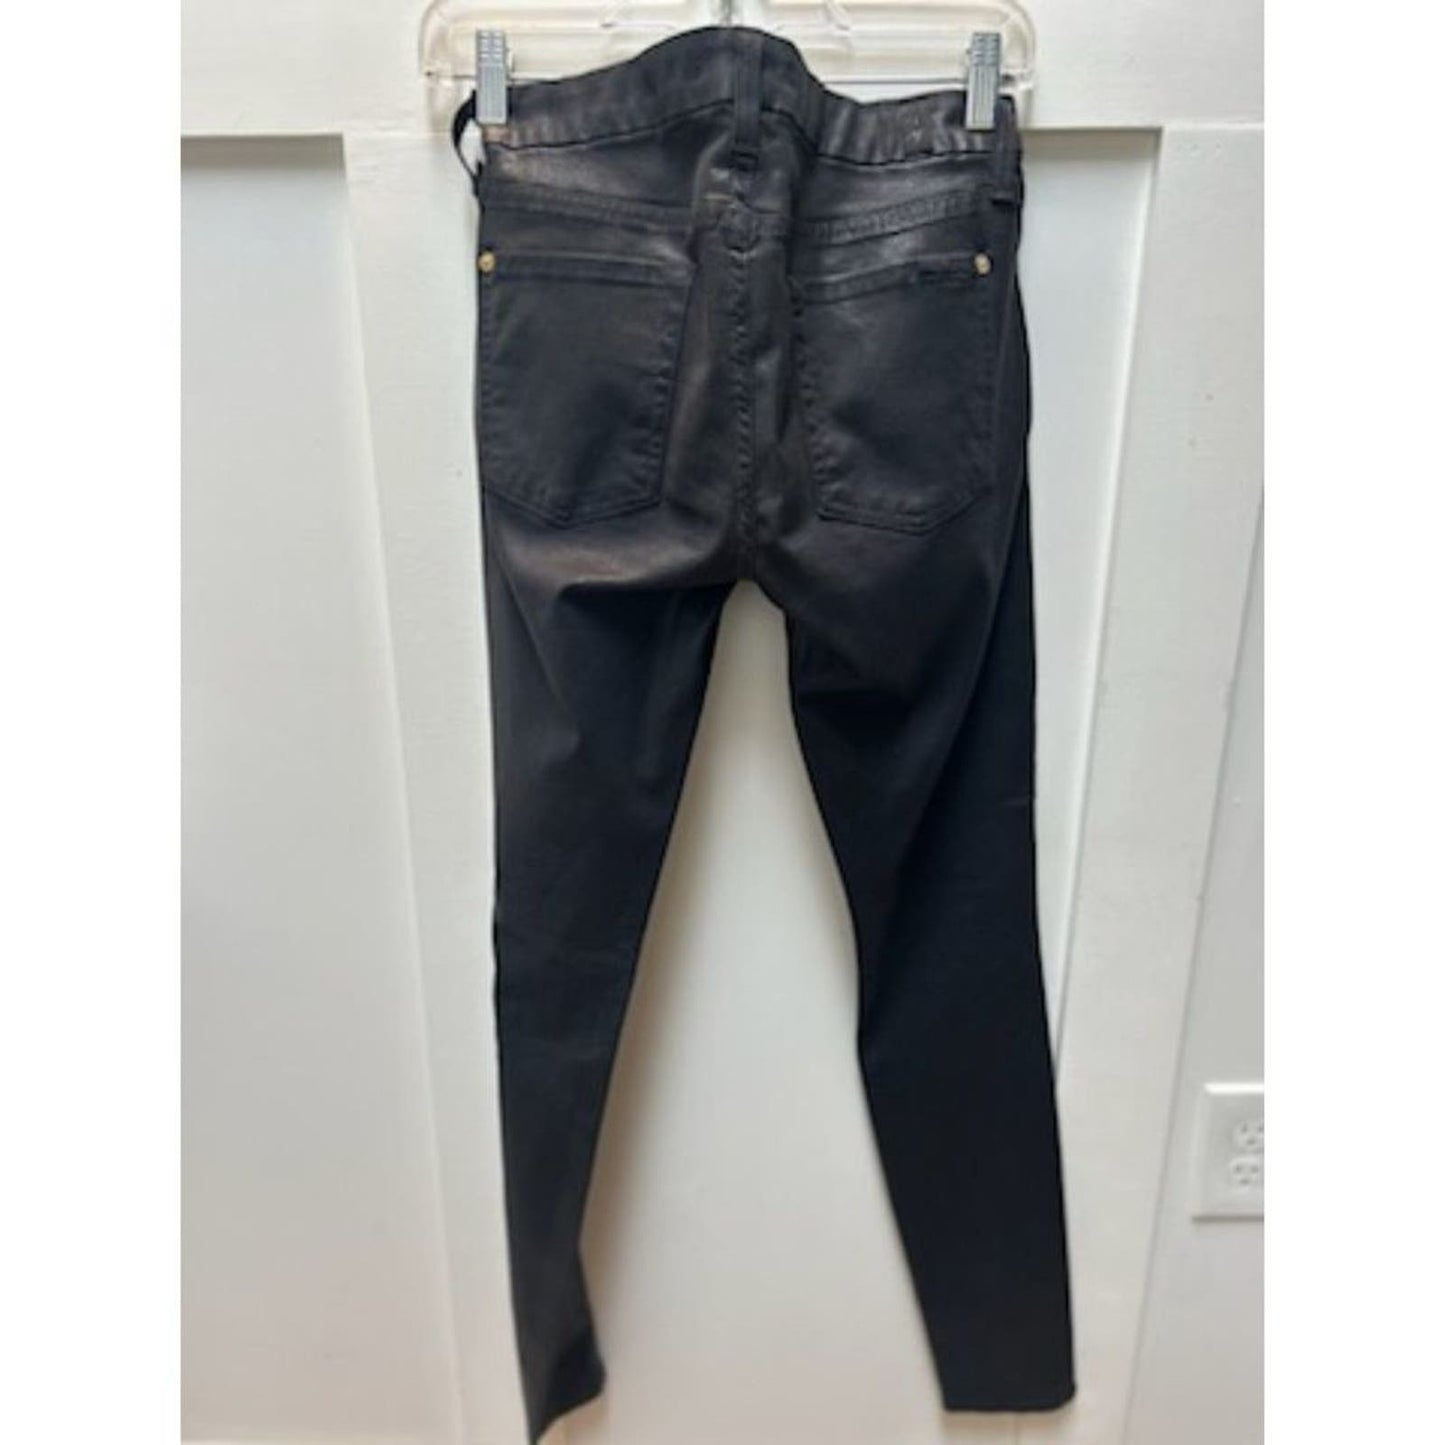 7 For All Man Kind Coated Black Skinny Jeans Size 27